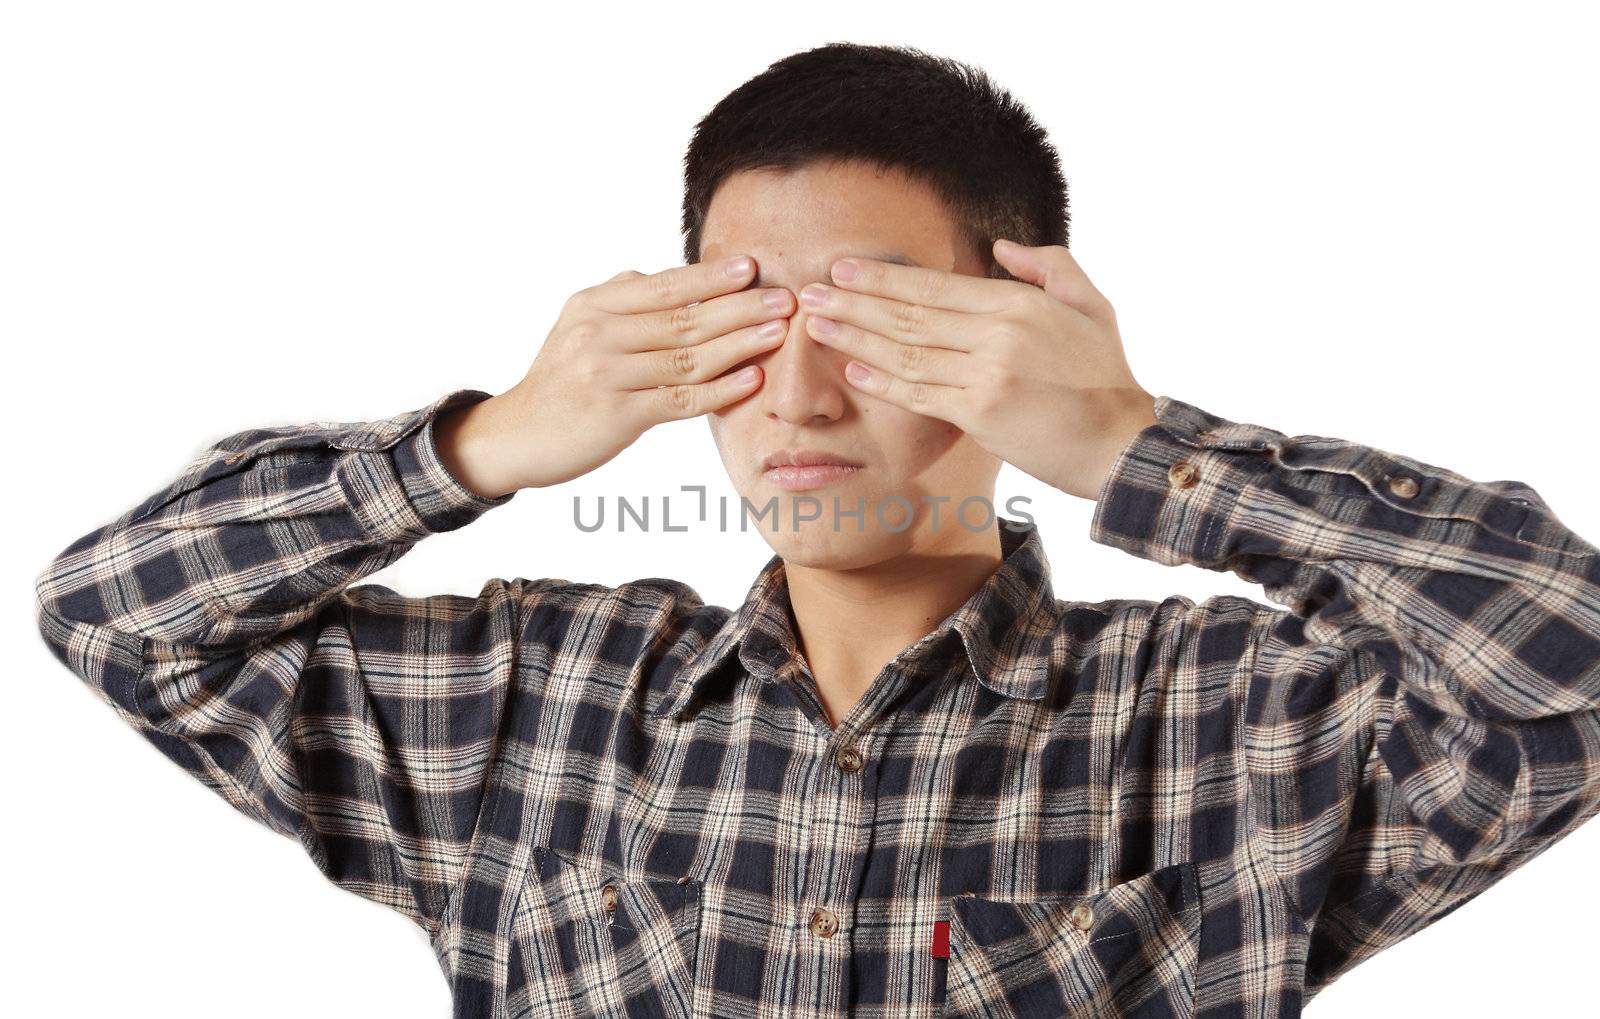 Portrait of a young man covering his eyes with hands 